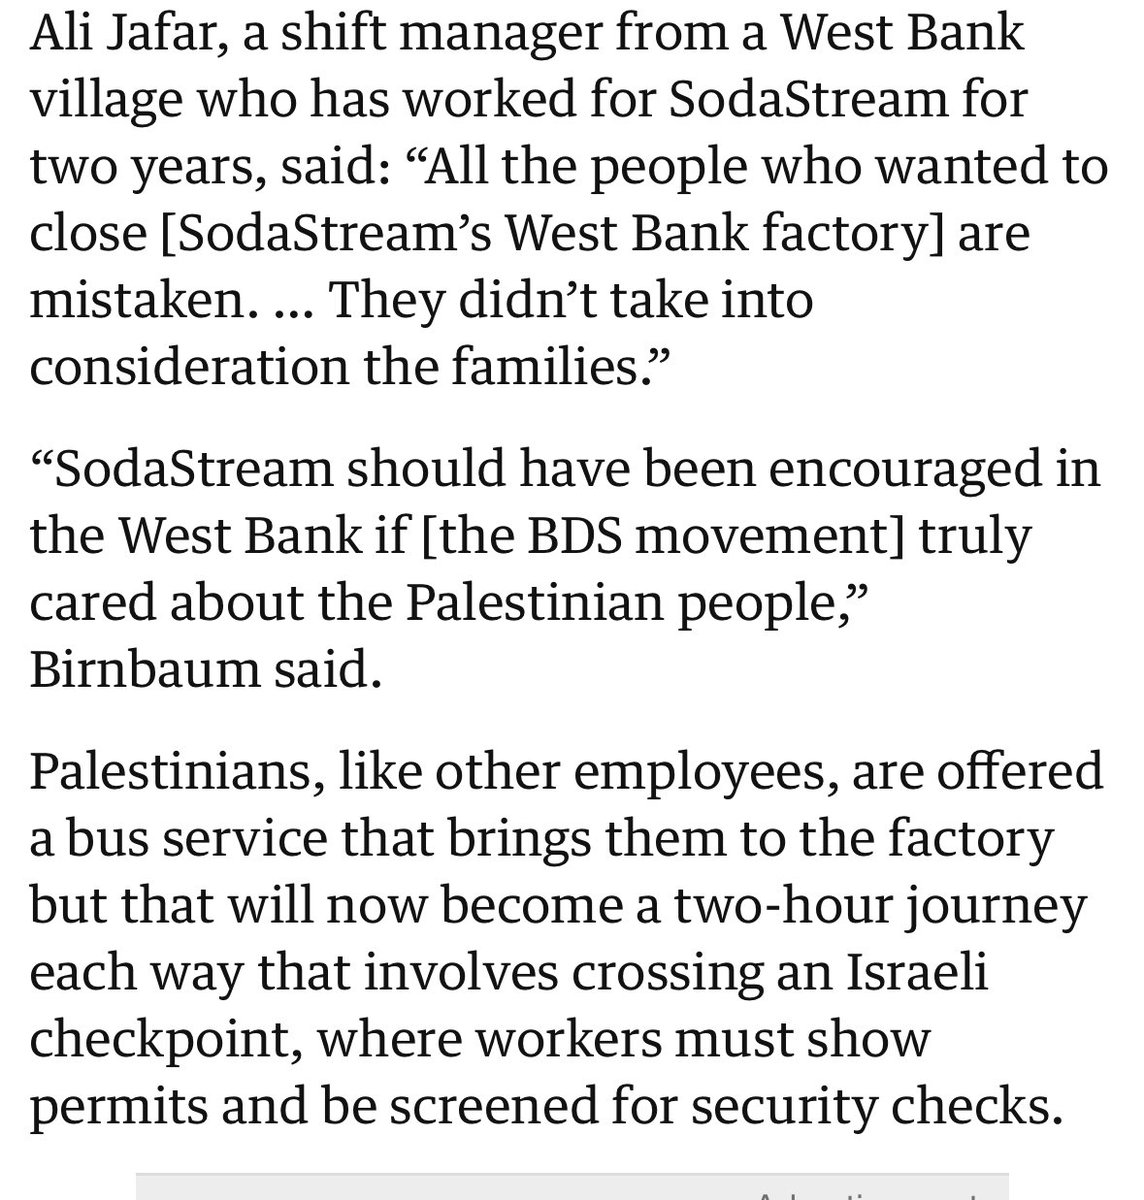 That factory employed 600 Palestinian workers. They received much higher wages than any other jobs available in the West Bank. SodaStream got so tired of the boycott nonsense that they moved the factory to Israel’s interior and most of those Palestinians lost their jobs.